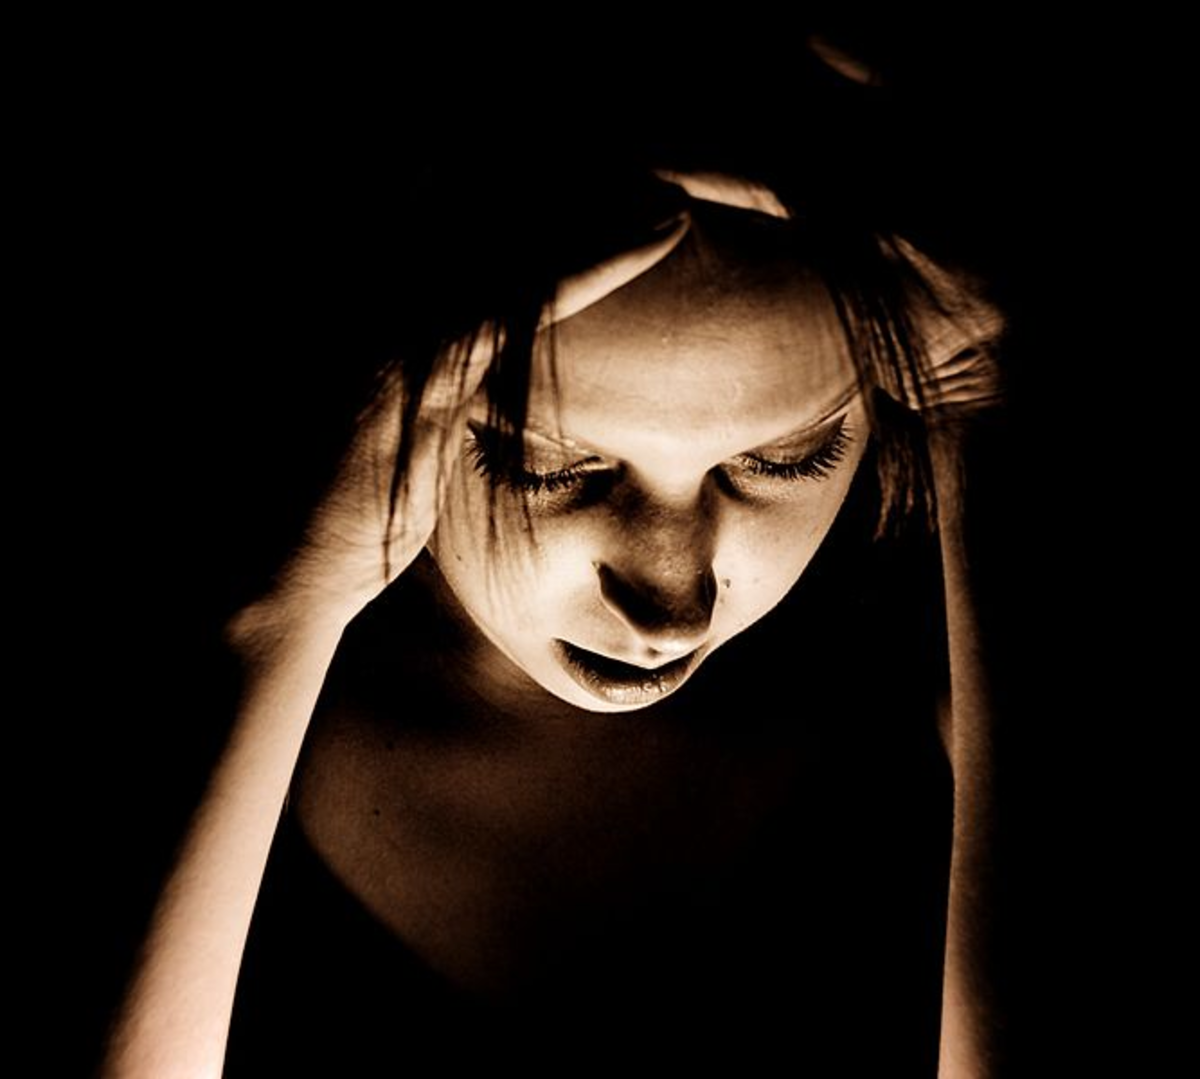 Migraines can be caused by a lack of sleep